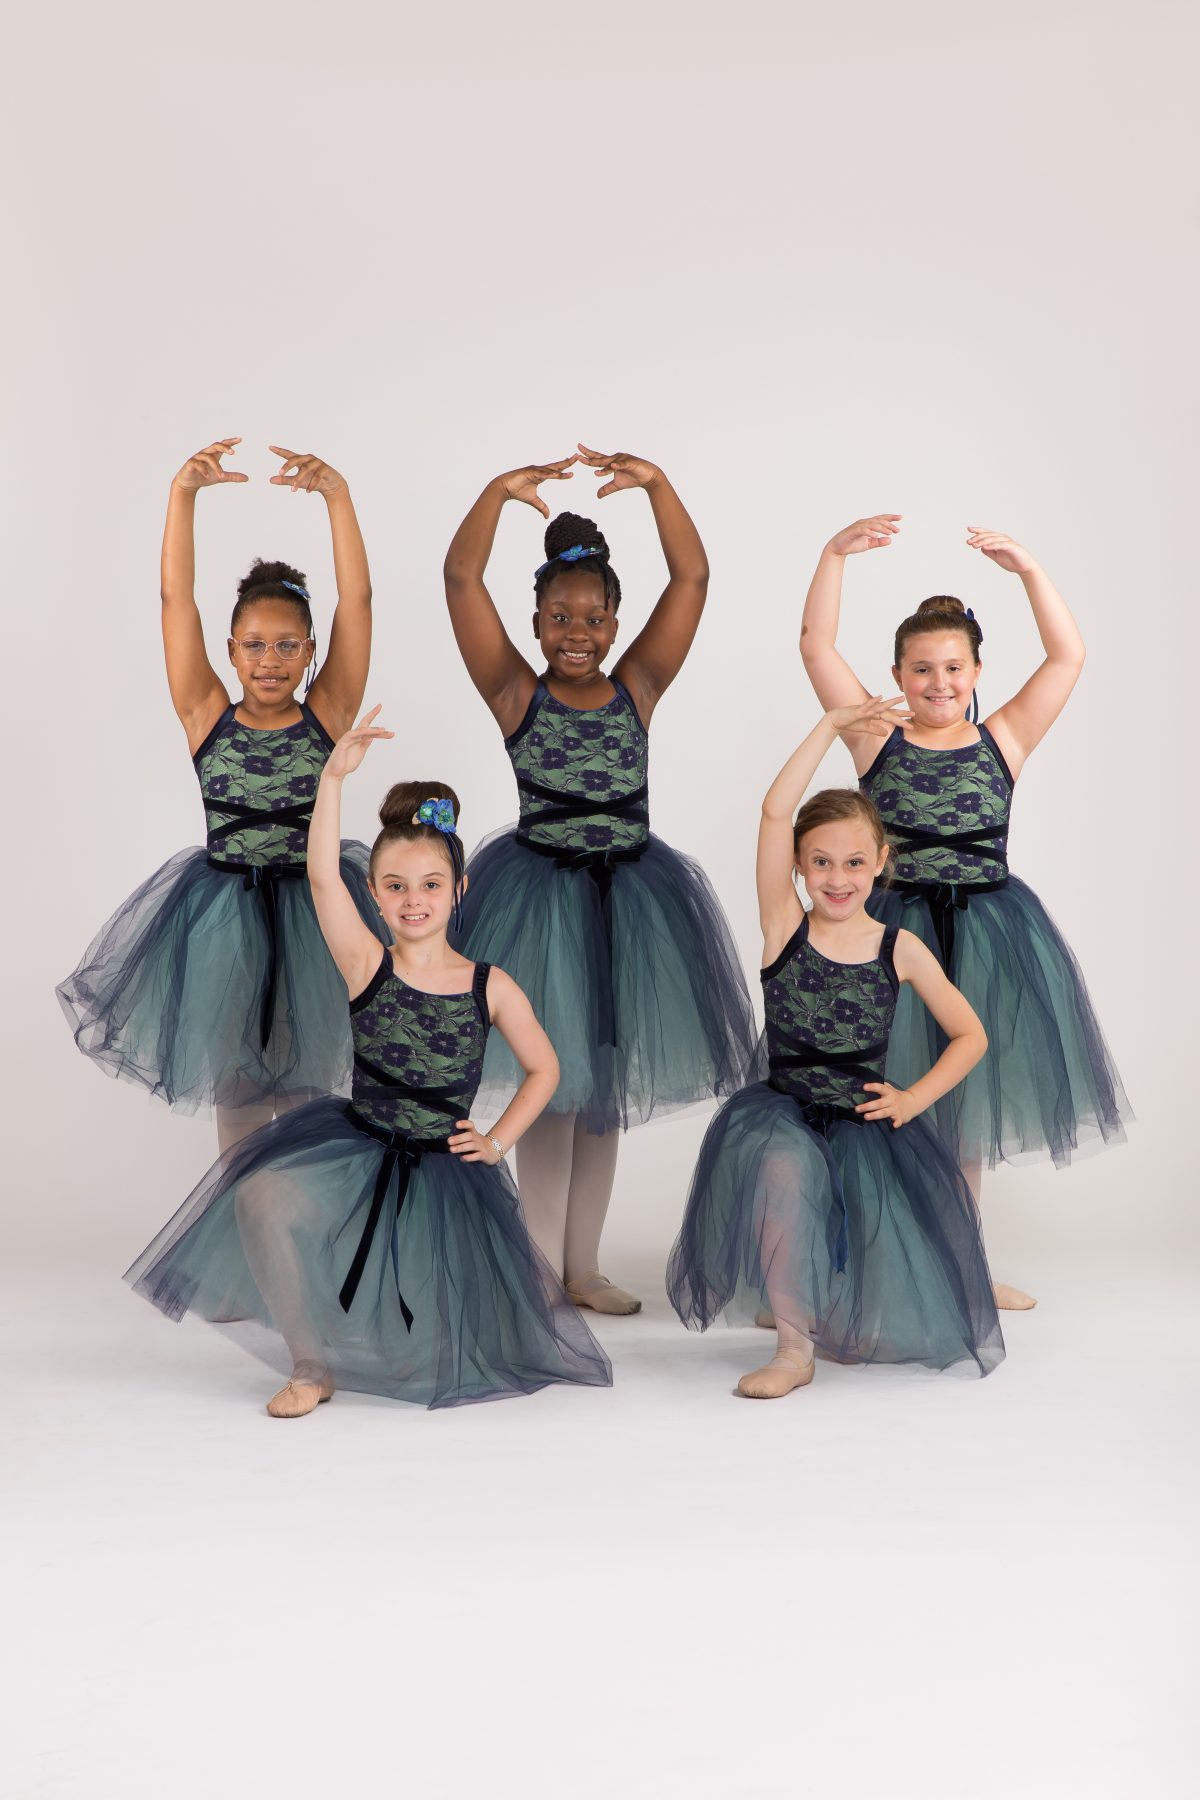 Equilibrium Dance Academy – Ballet Level 1 for ages 7-12